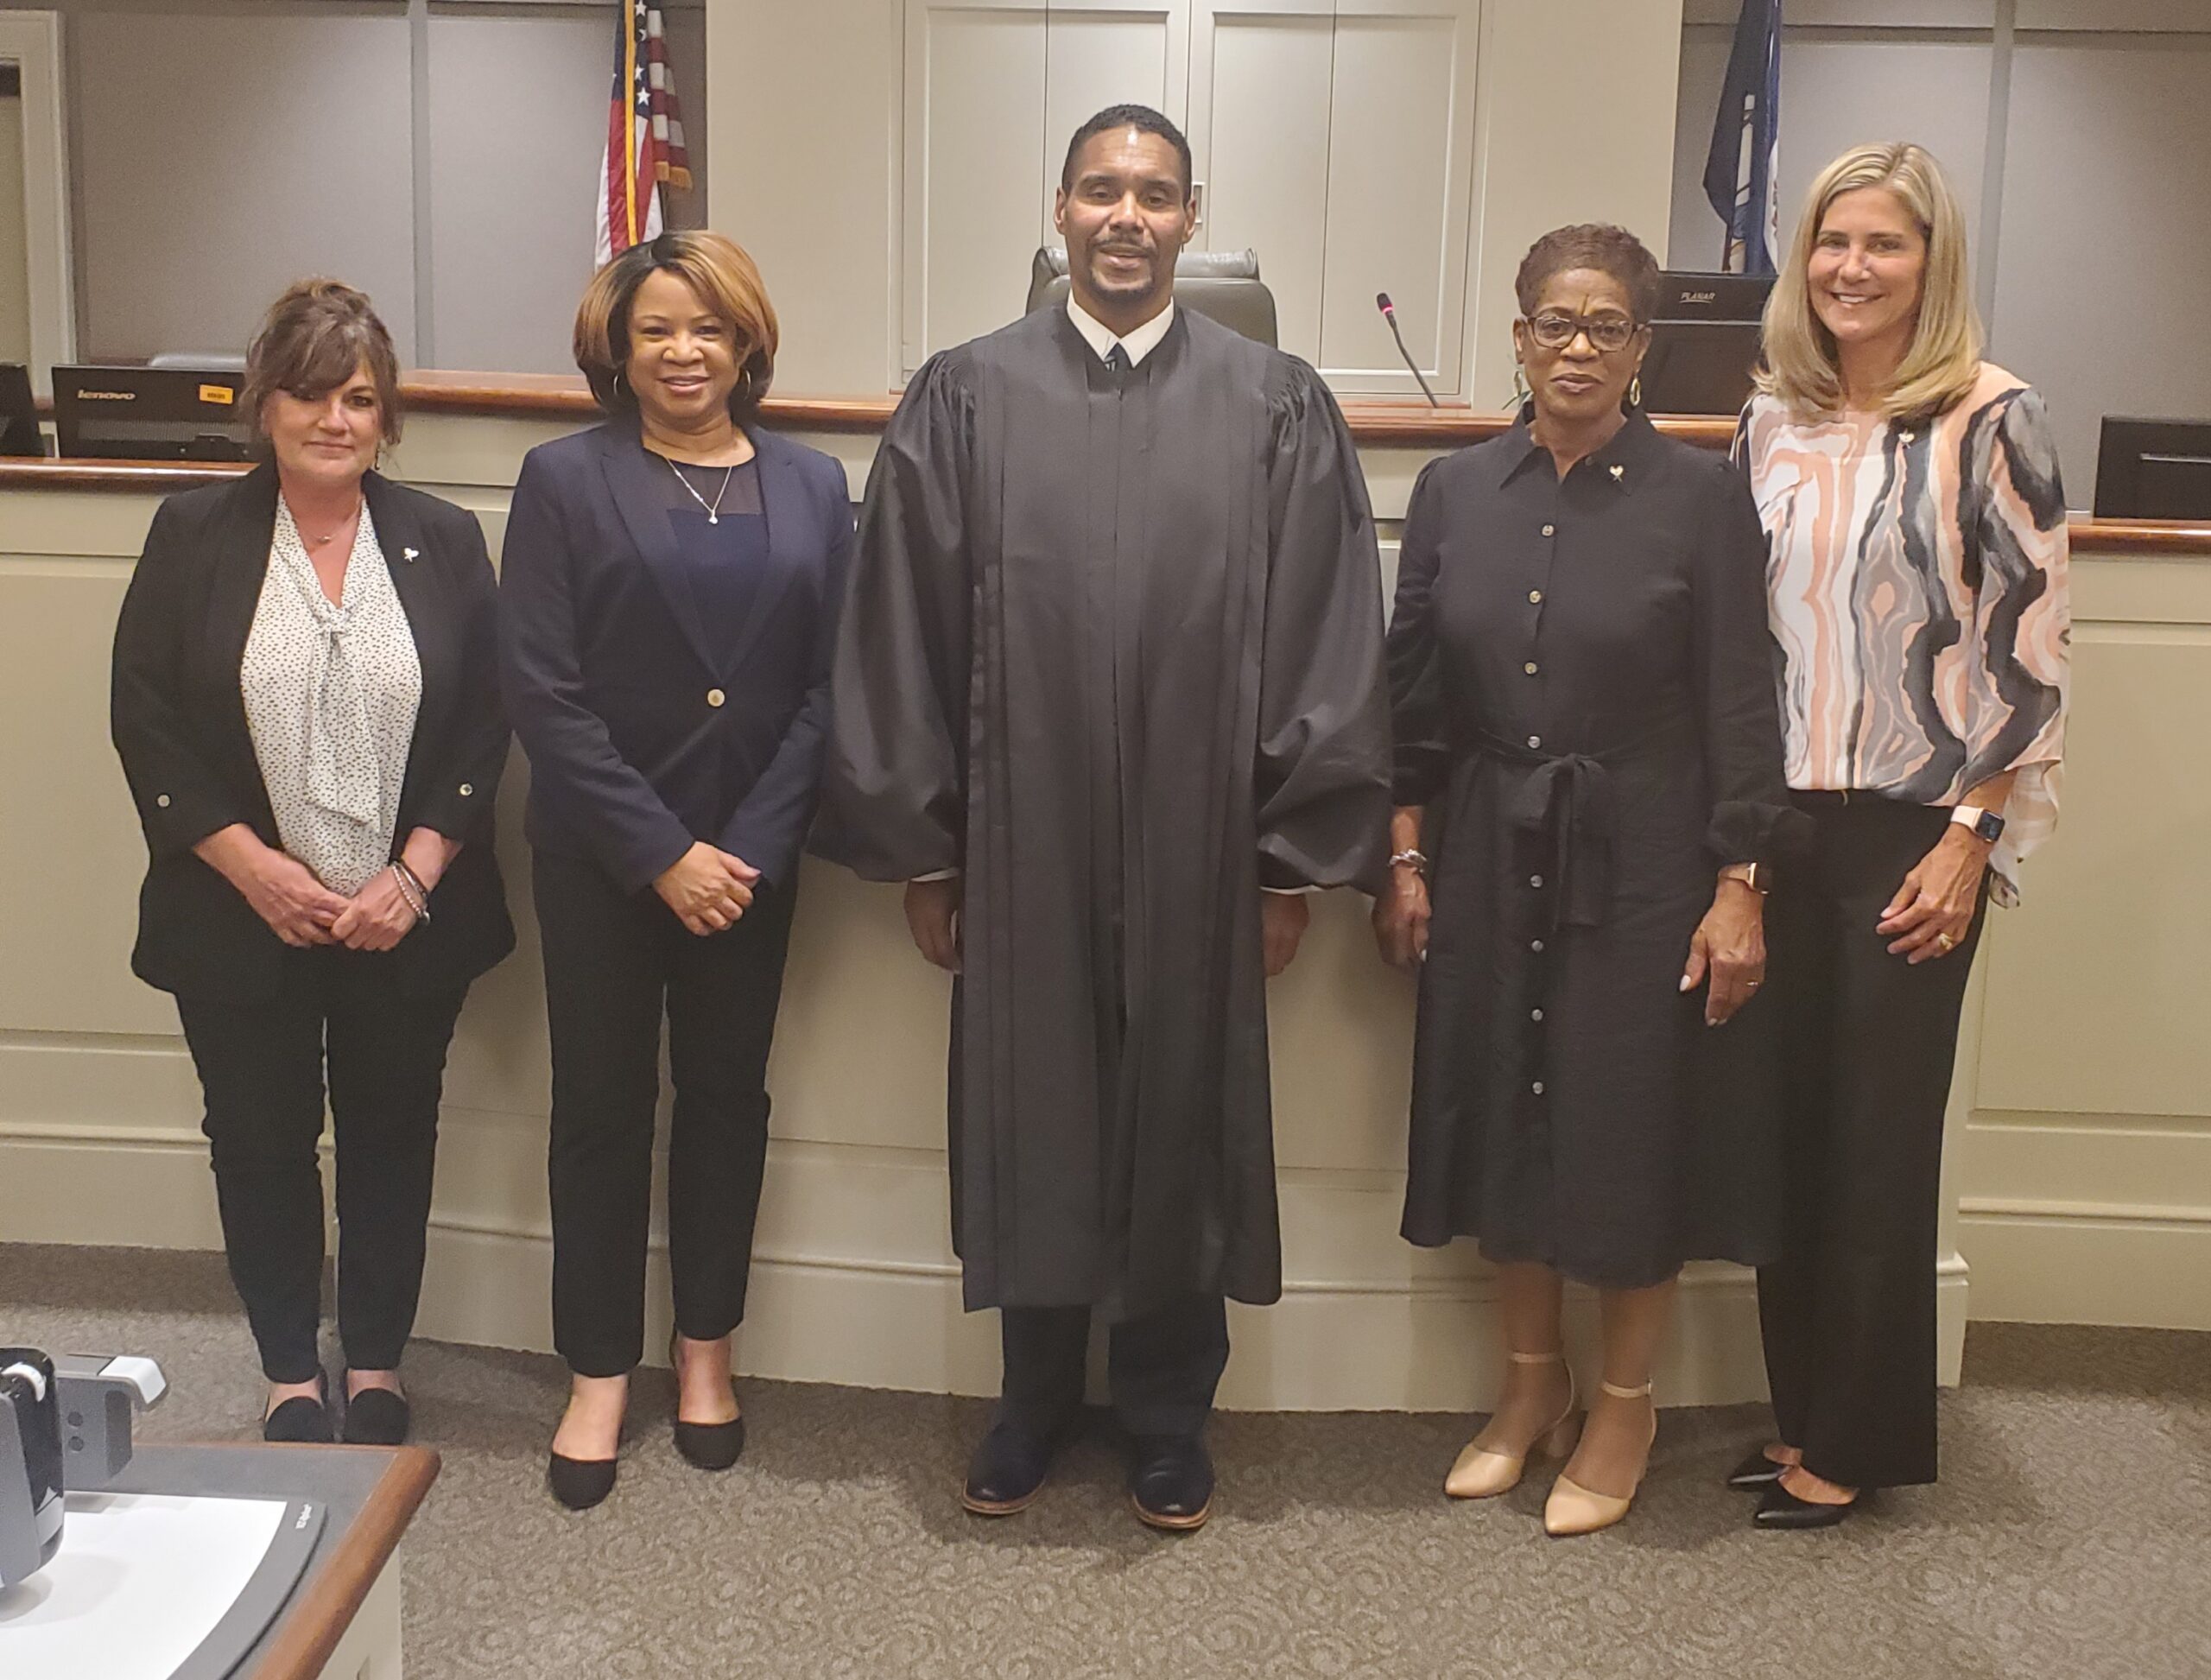 Chesterfield CASA's newest court appointed special advocates were sworn in